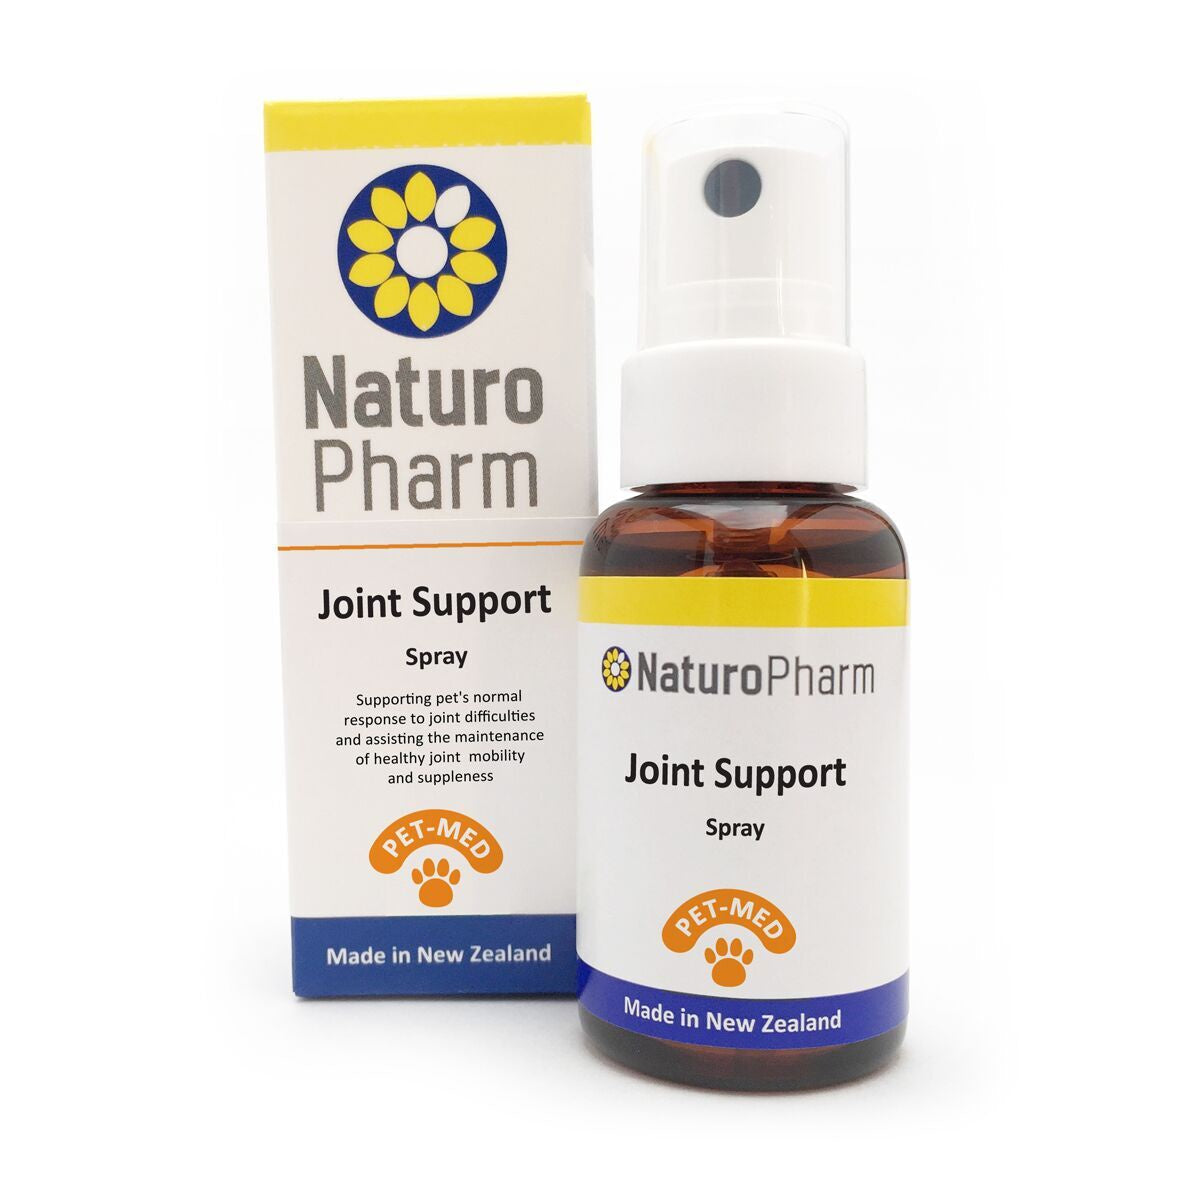 Naturopharm Dispensary Naturopharm Pet Med Joint Support Homeopathic Oral Spray 25 ml